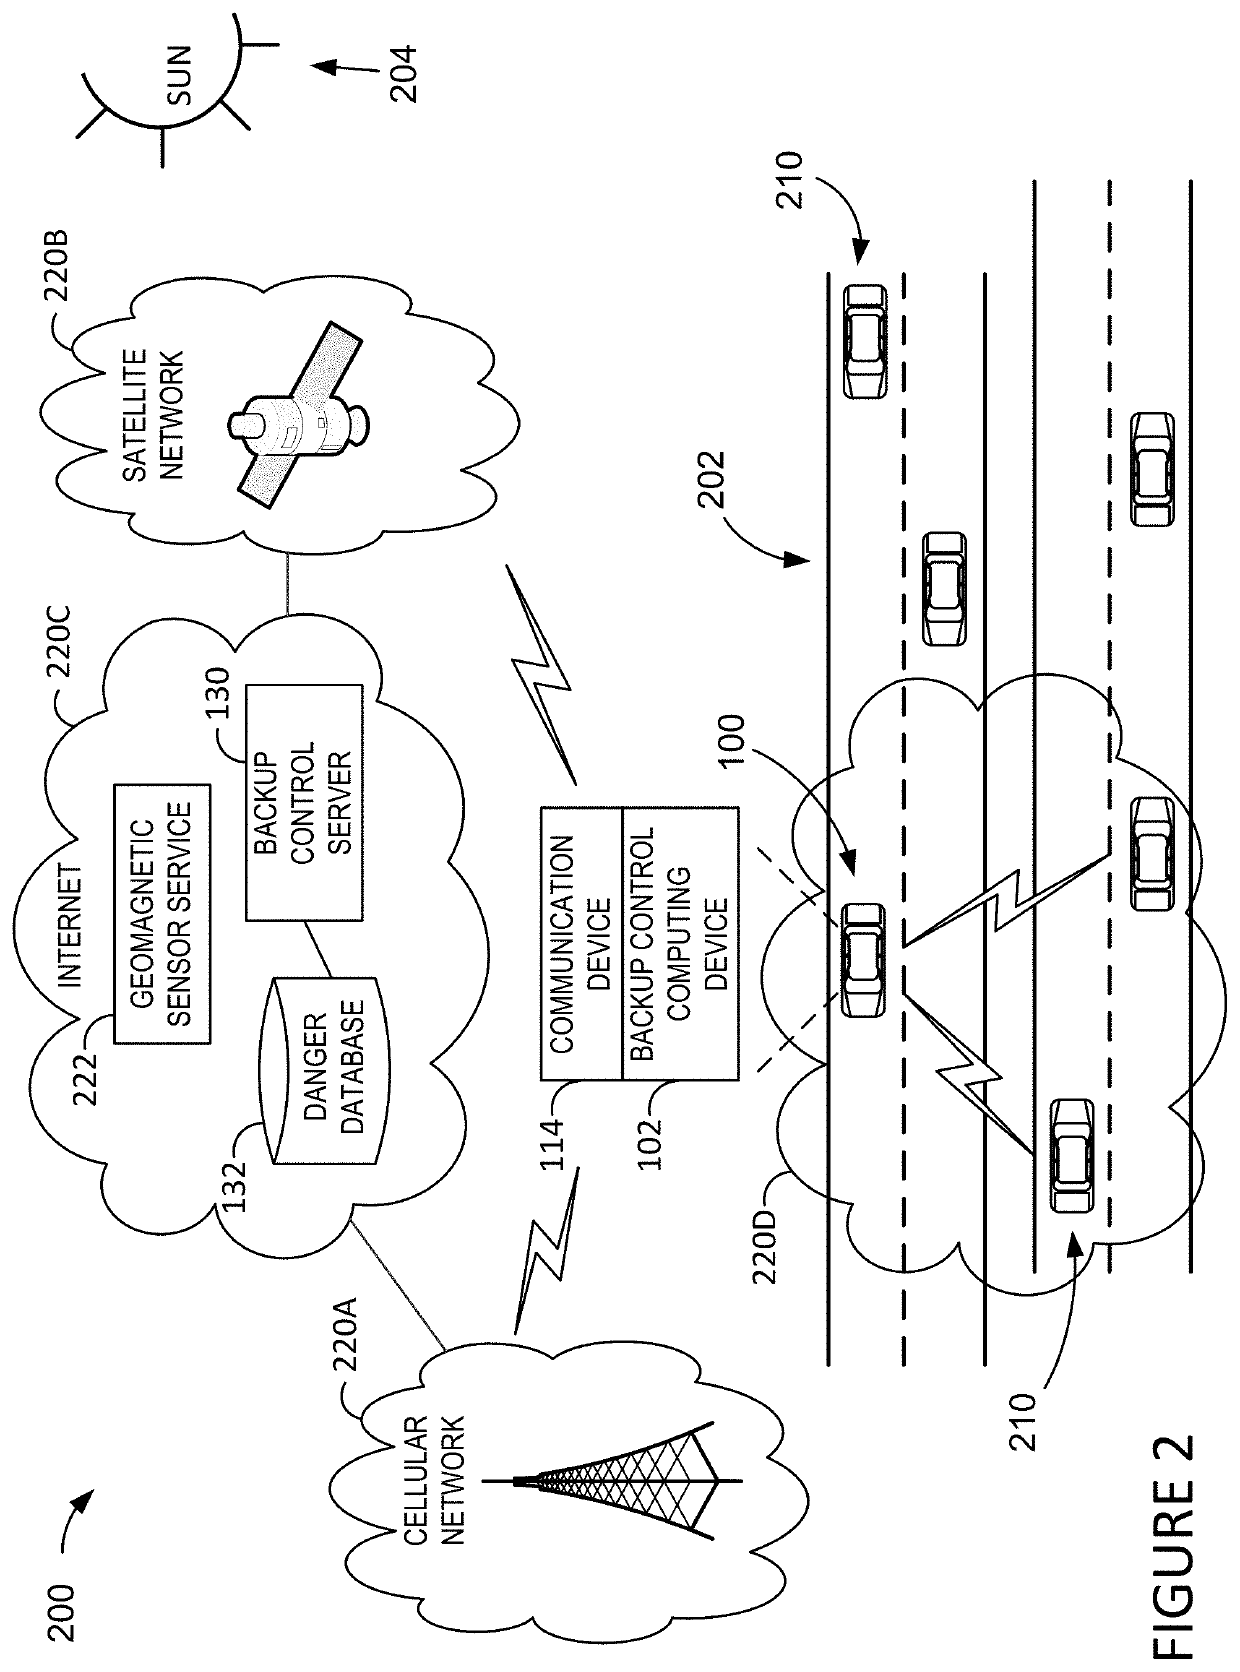 Backup control systems and methods for autonomous vehicles